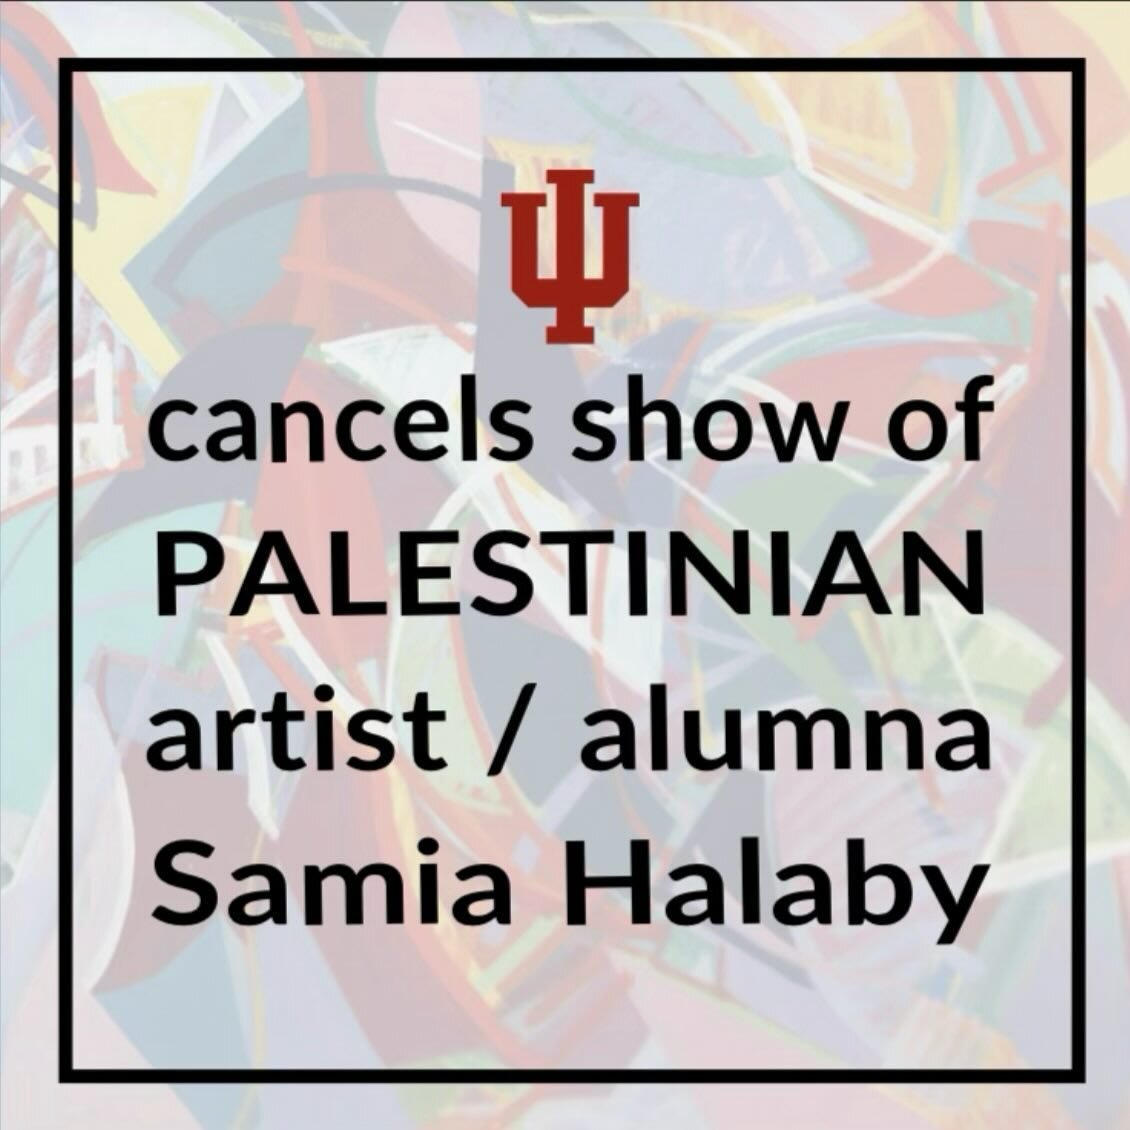 Call to action link in bio:
Indiana University President Whitten, reinstate Samia Halaby&rsquo;s retrospective immediately! @iu.president.whitten @eskenazimuseum @samiahalaby 

Indiana University has decided to cancel the retrospective of Palestinian